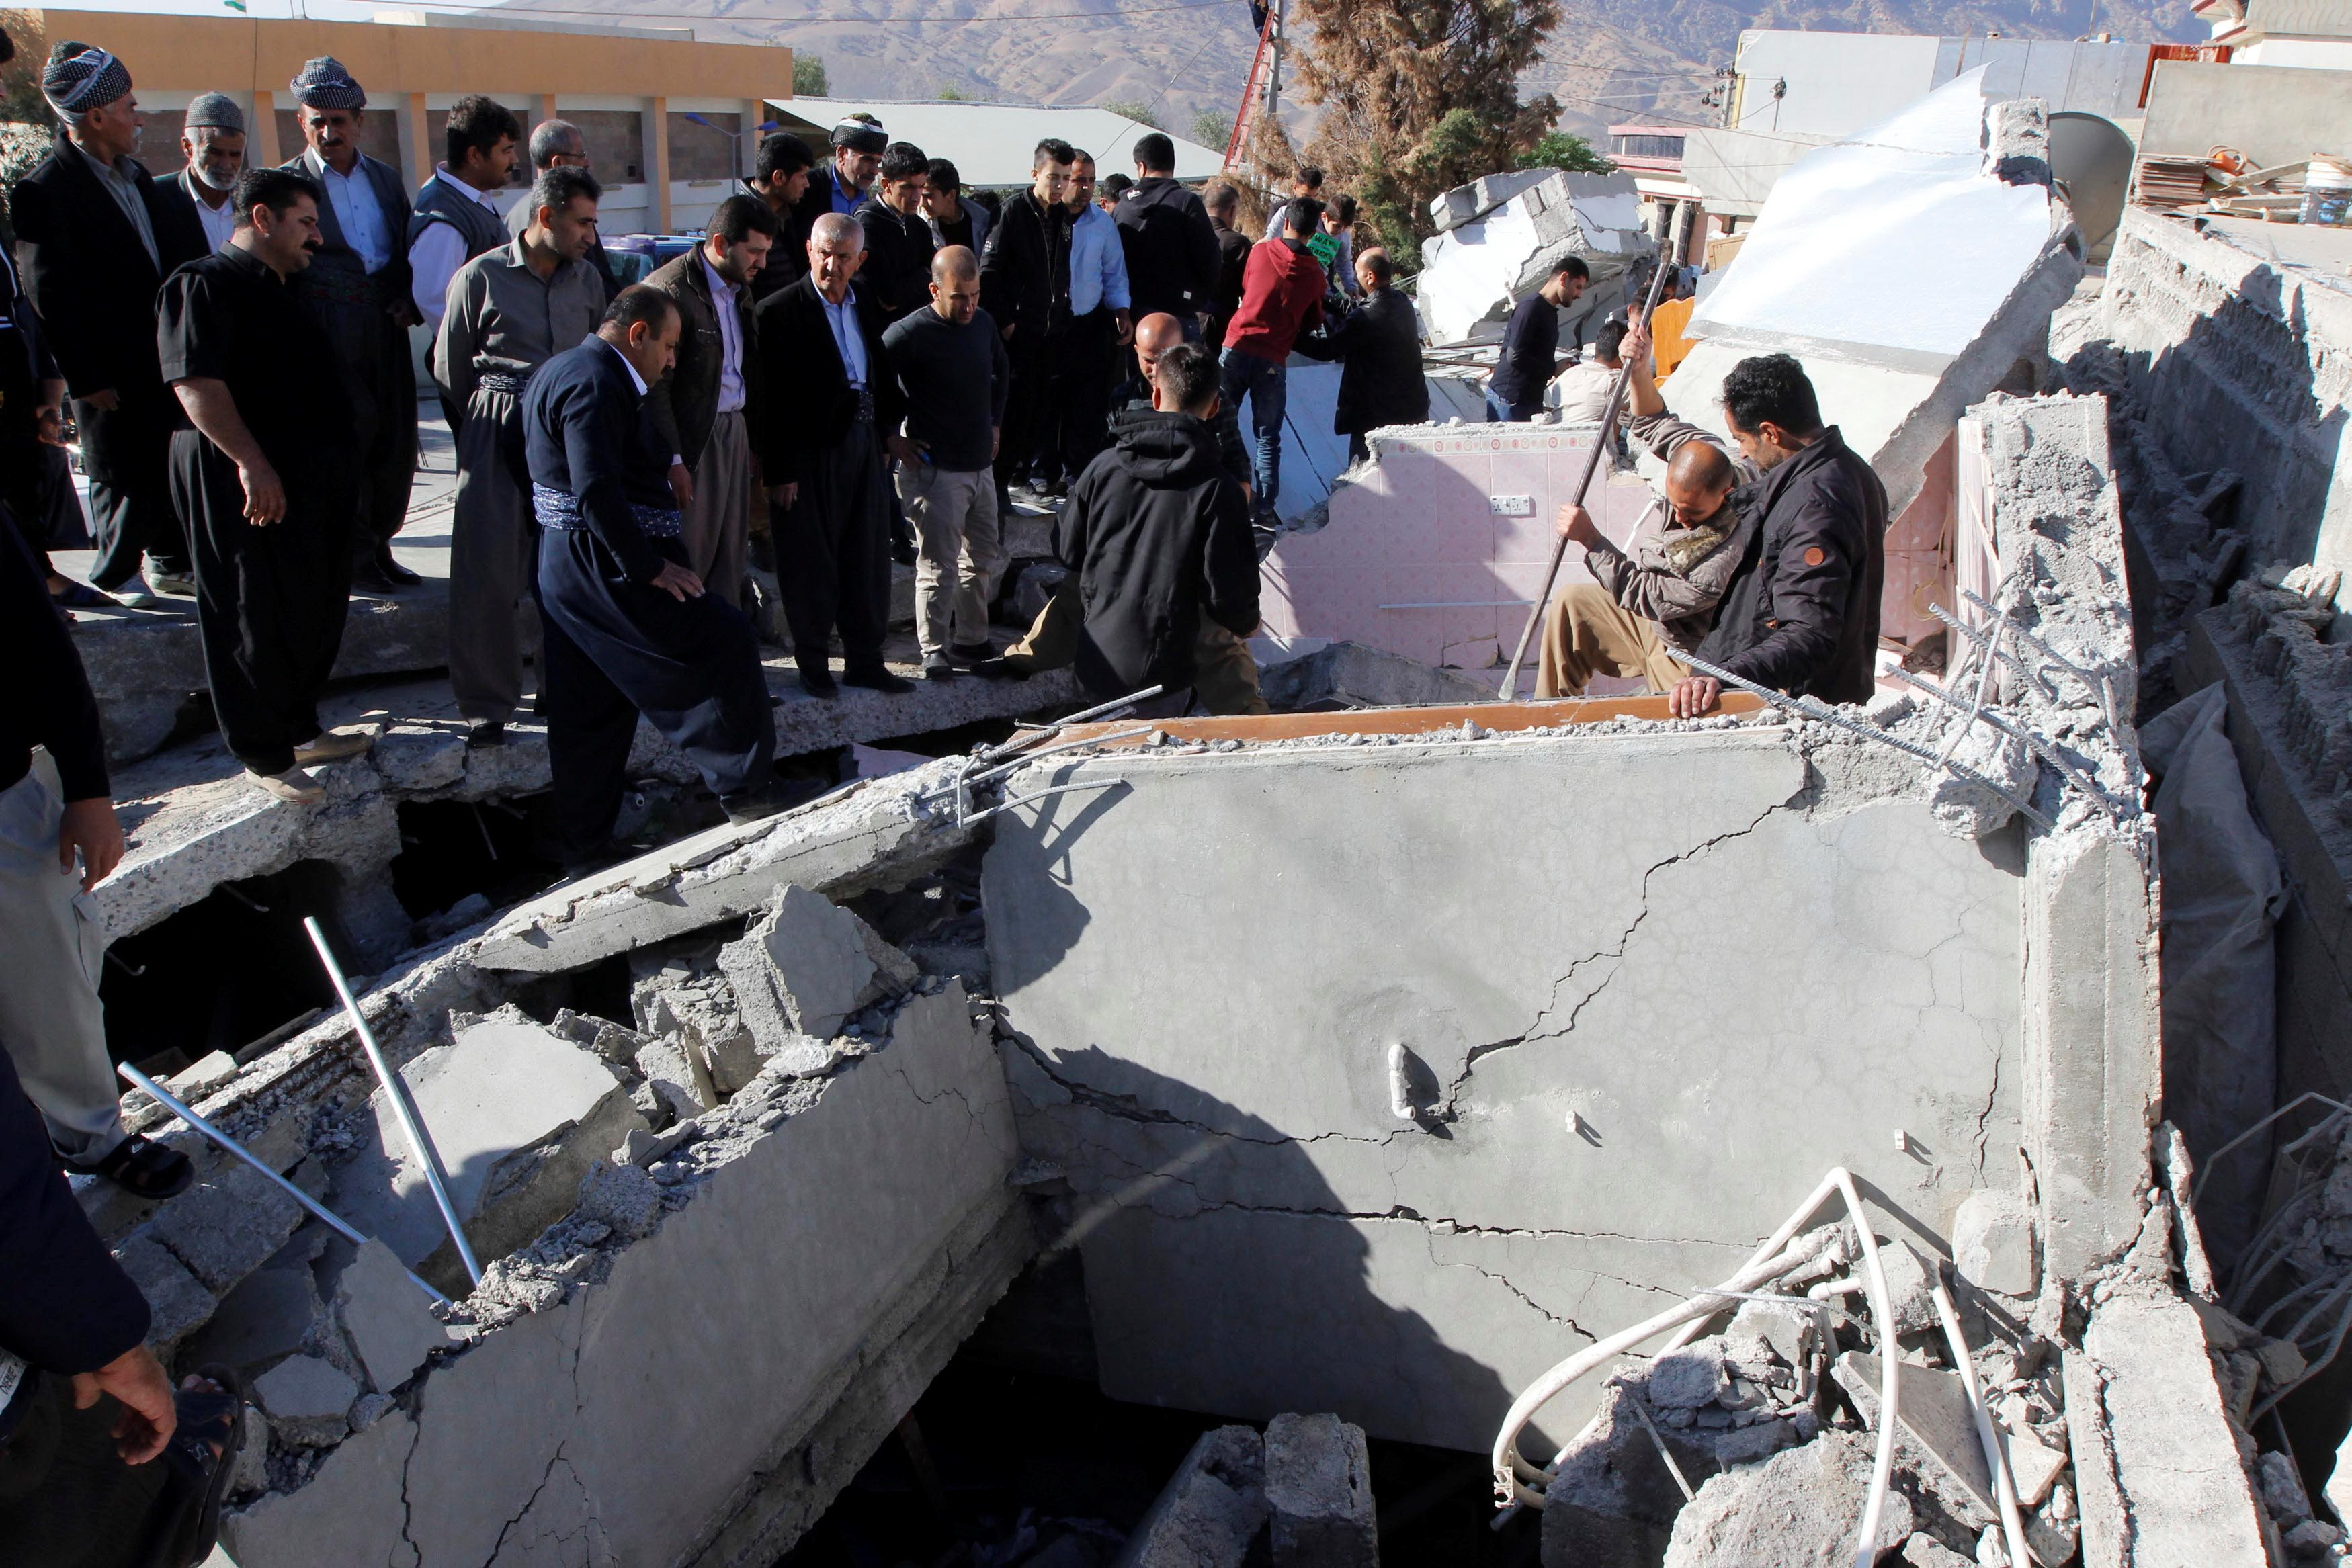 Residents gather near a damaged building following an earthquake in the town of Darbandikhan, near the city of Sulaimaniyah, in the semi-autonomous Kurdistan region, Iraq November 13, 2017. Photo: Reuters